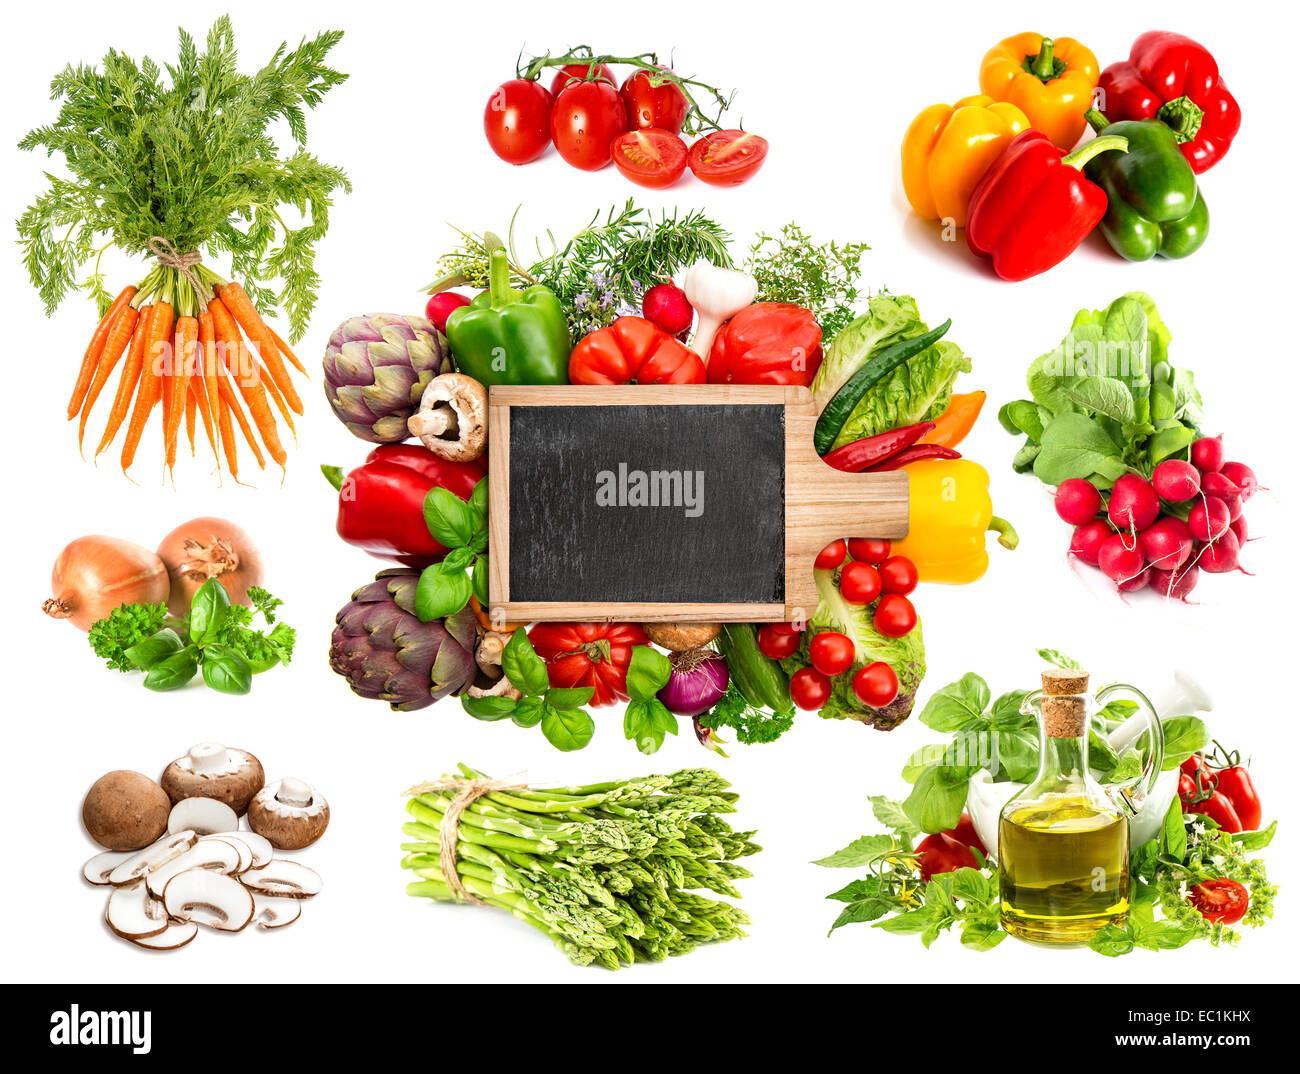 Vegetables and herbs isolated on white background. Blackboard for your text and food recipes. Healthy organic nutrition concept Stock Photo